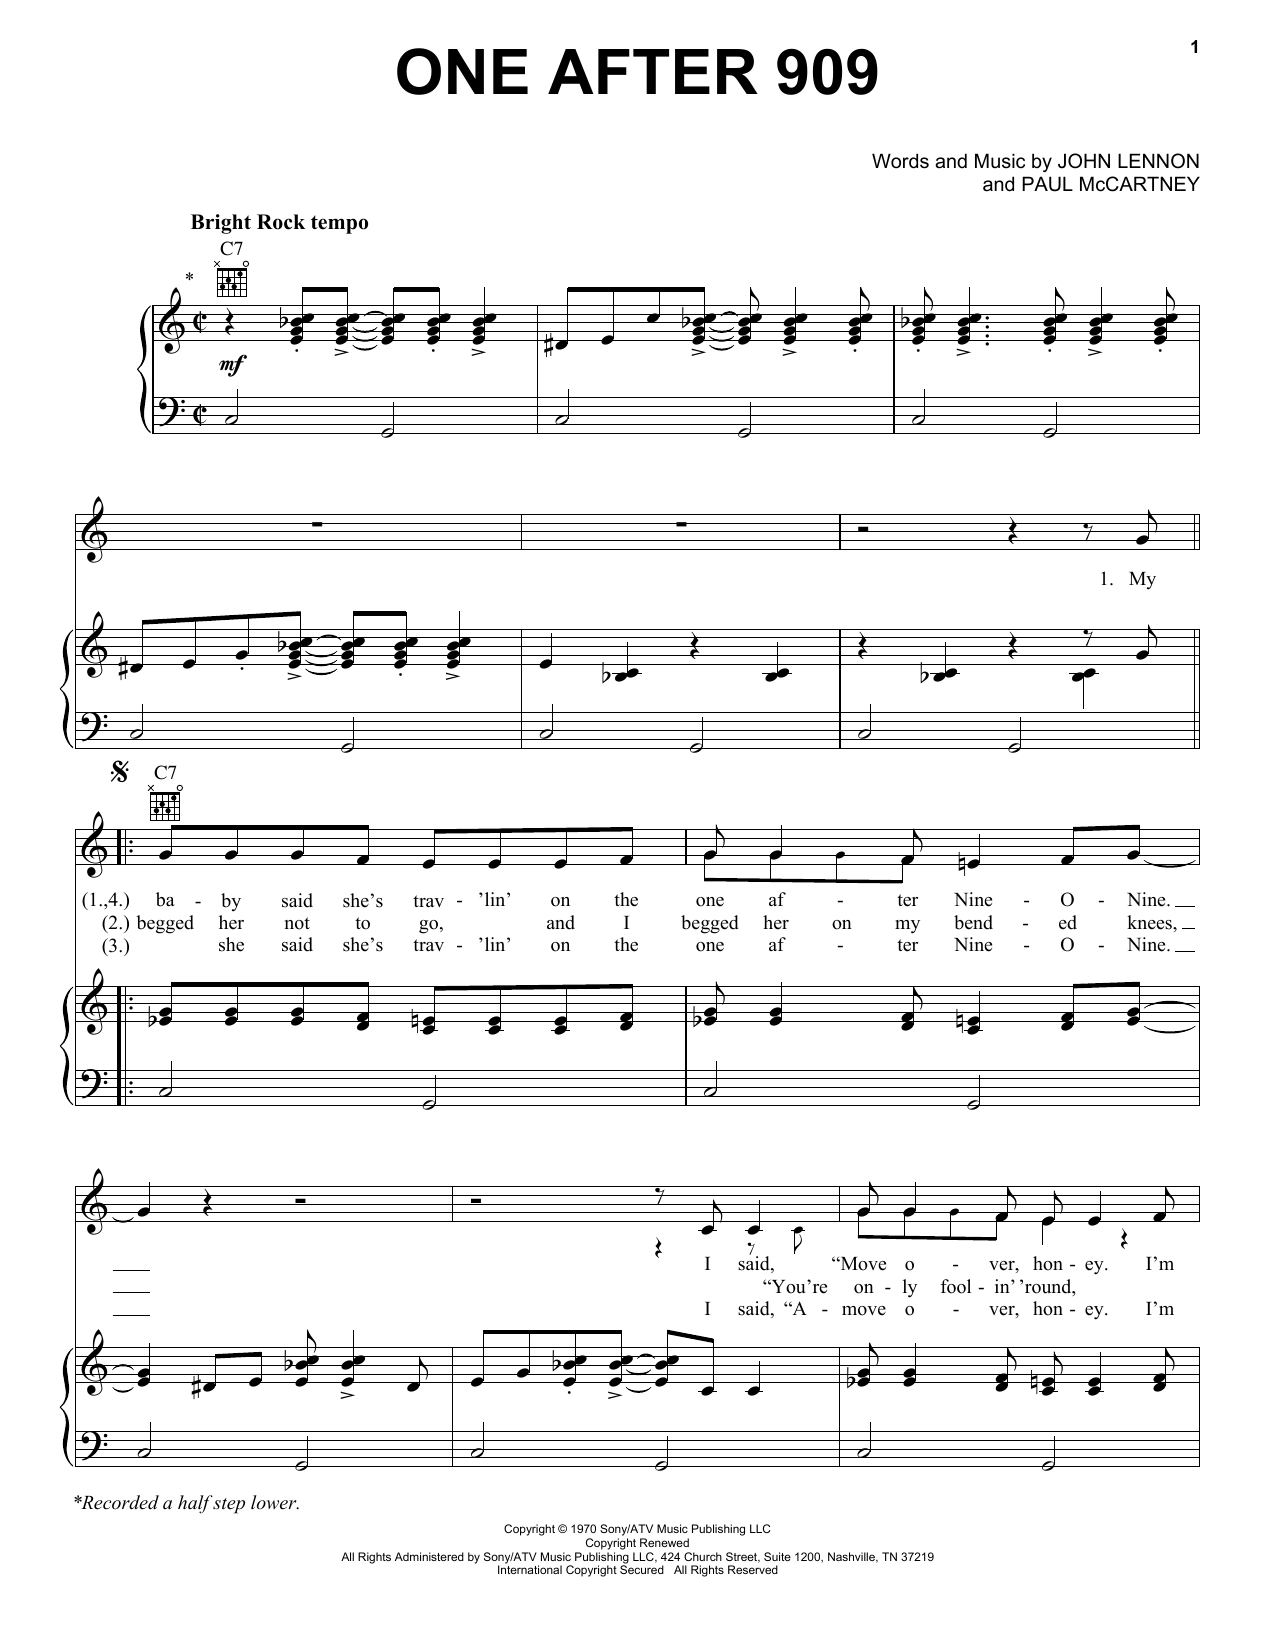 Download The Beatles One After 909 Sheet Music